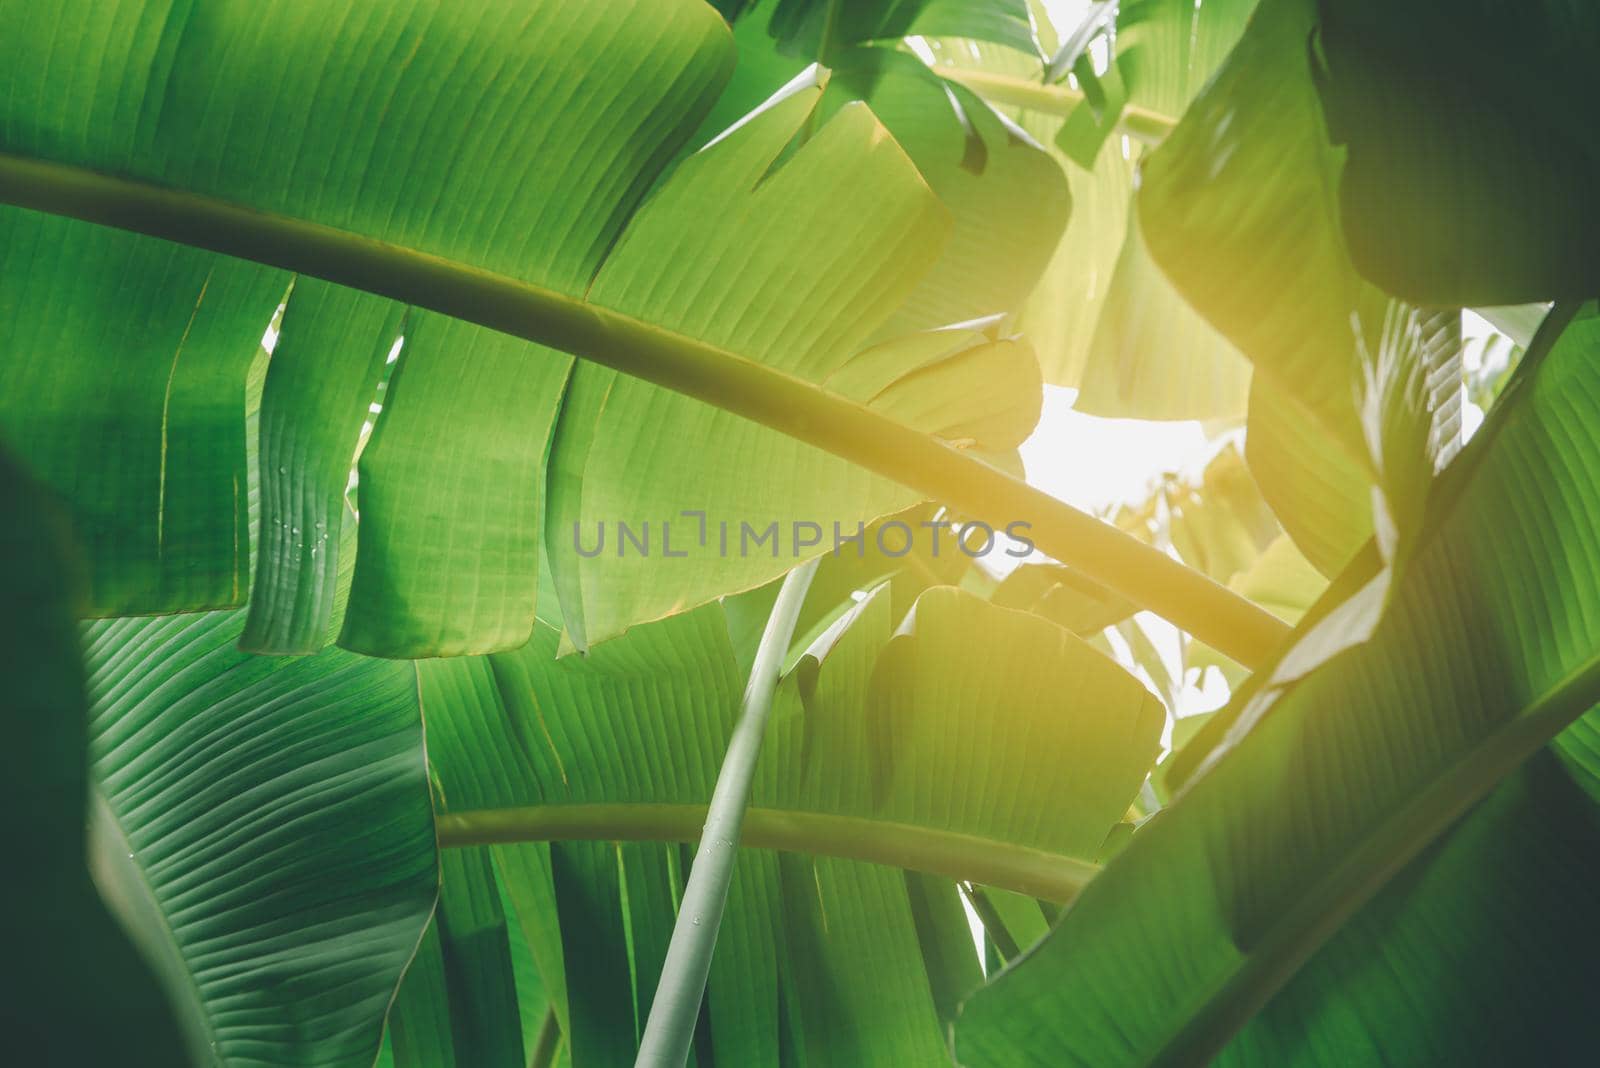 Greenery background, green color of nature plant and leaf environment greenery concept (Banana)